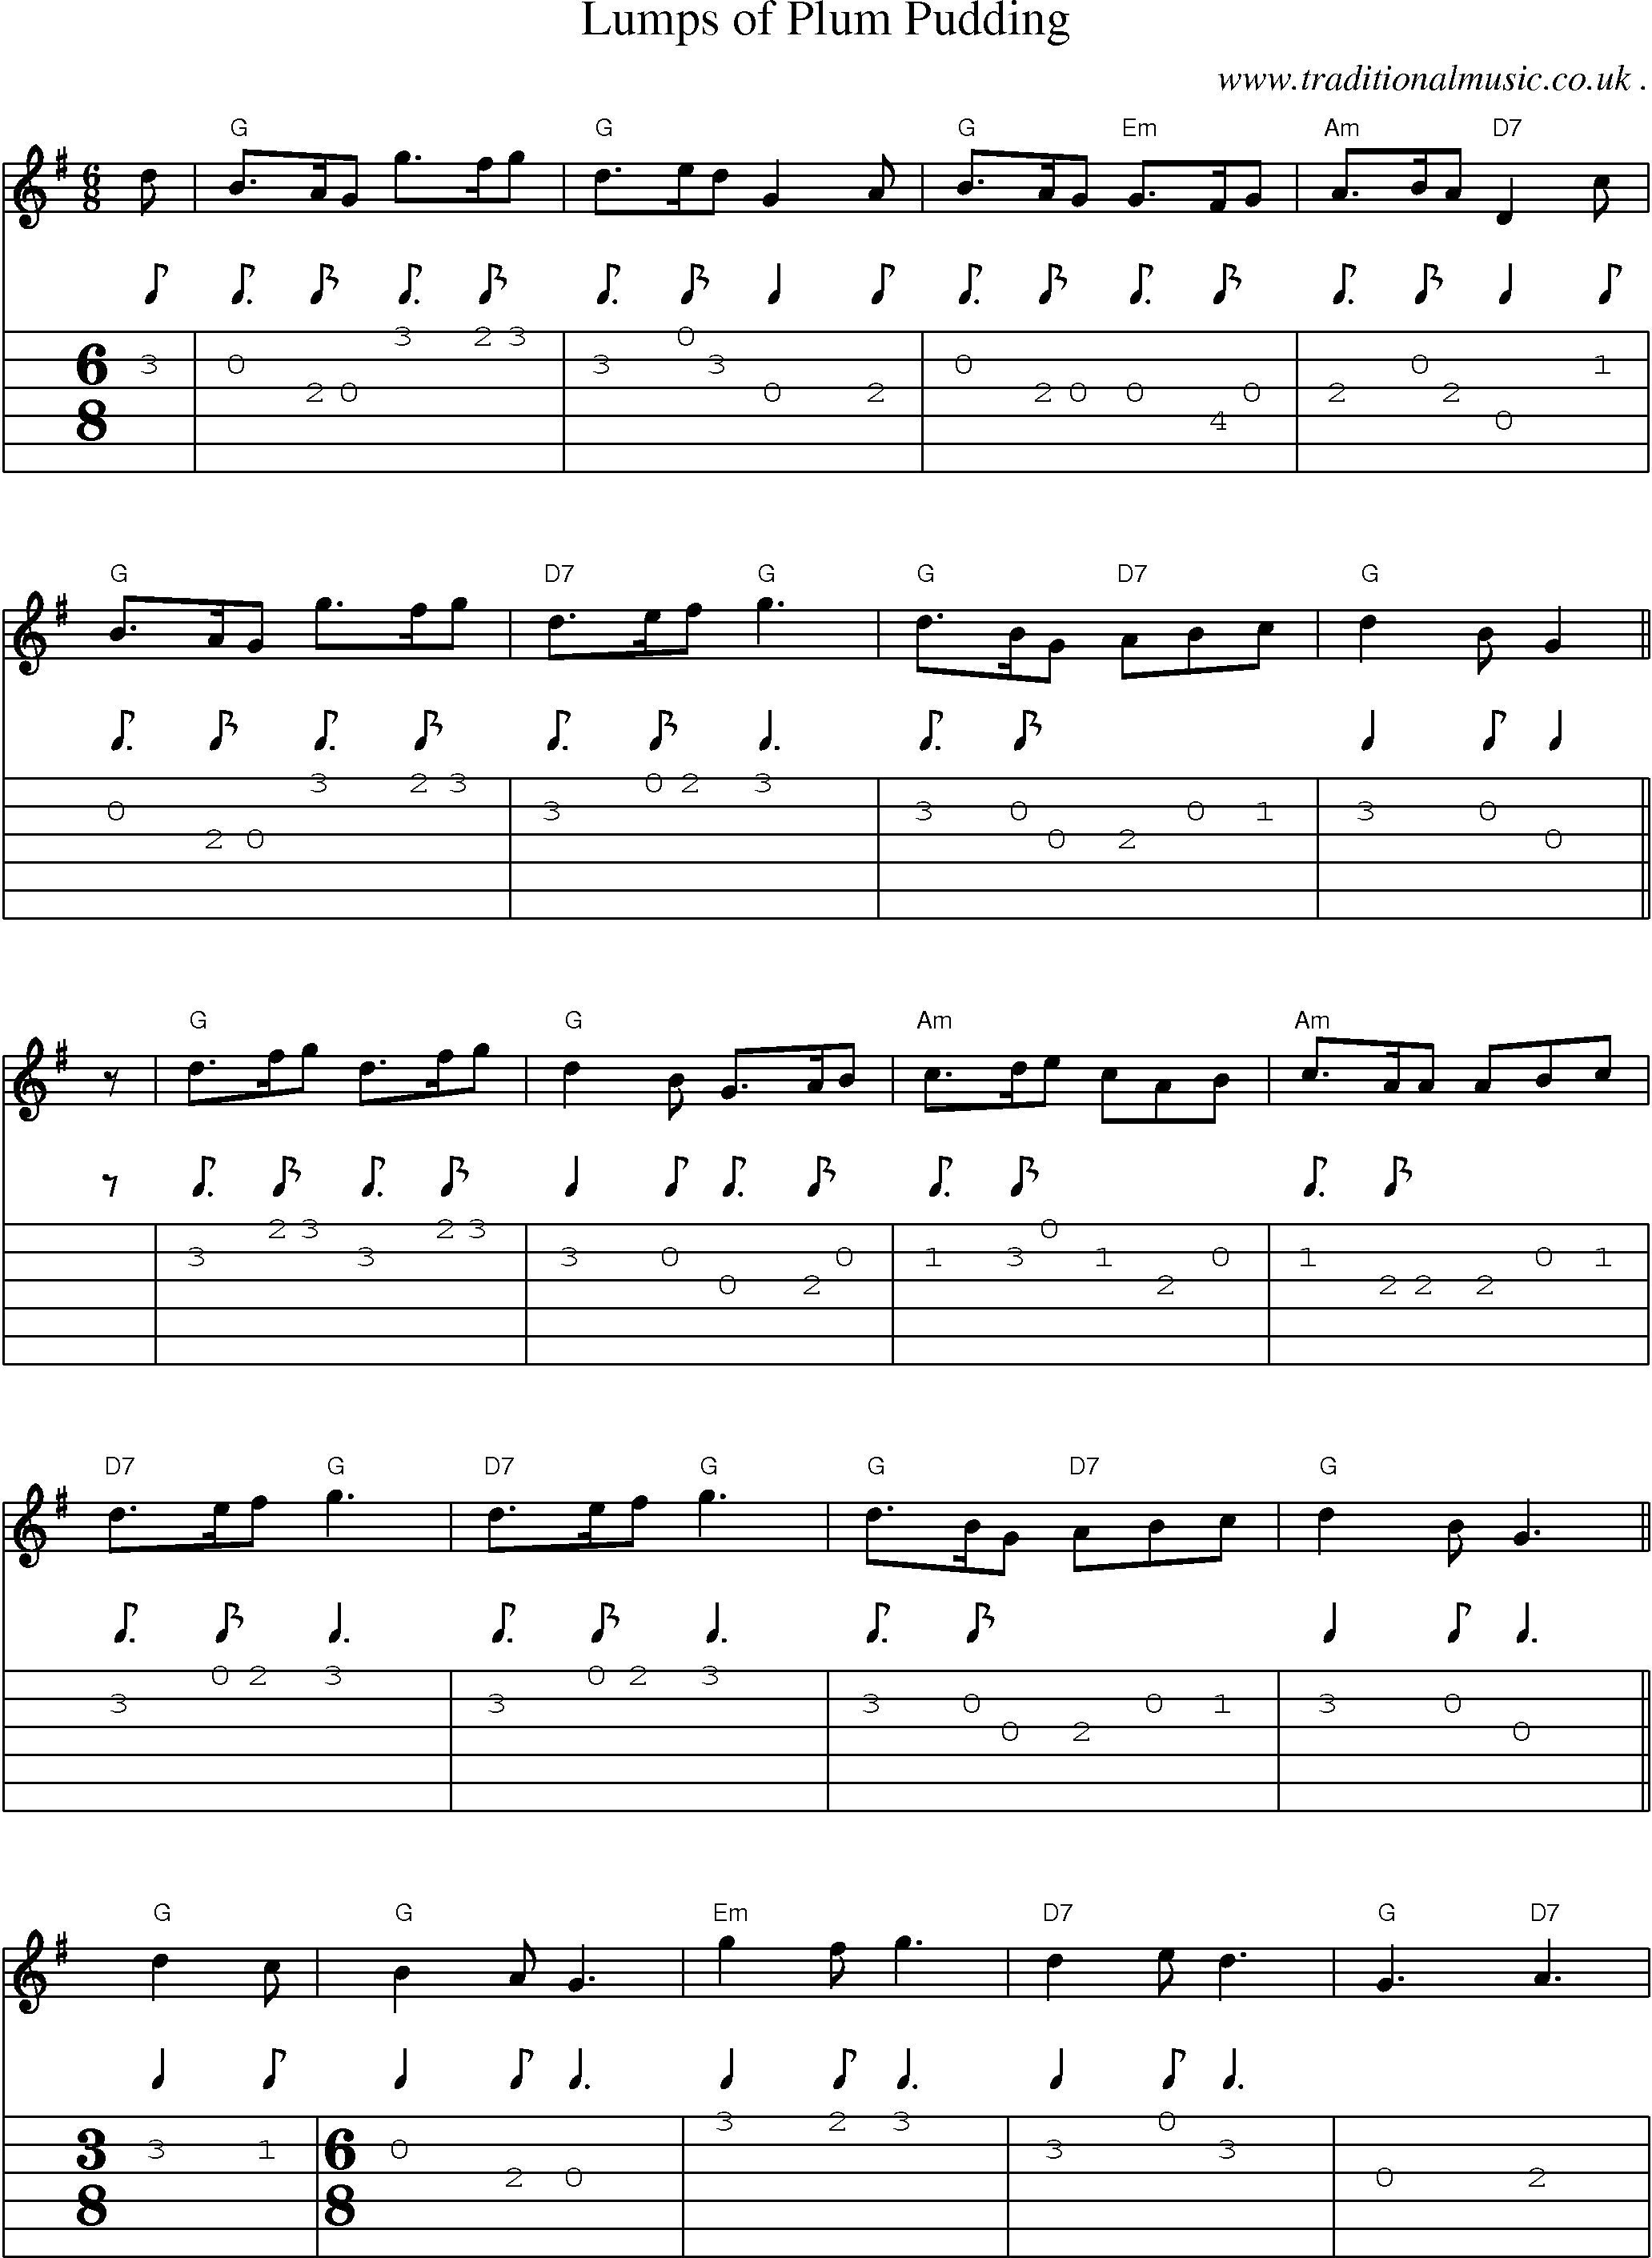 Music Score and Guitar Tabs for Lumps of Plum Pudding